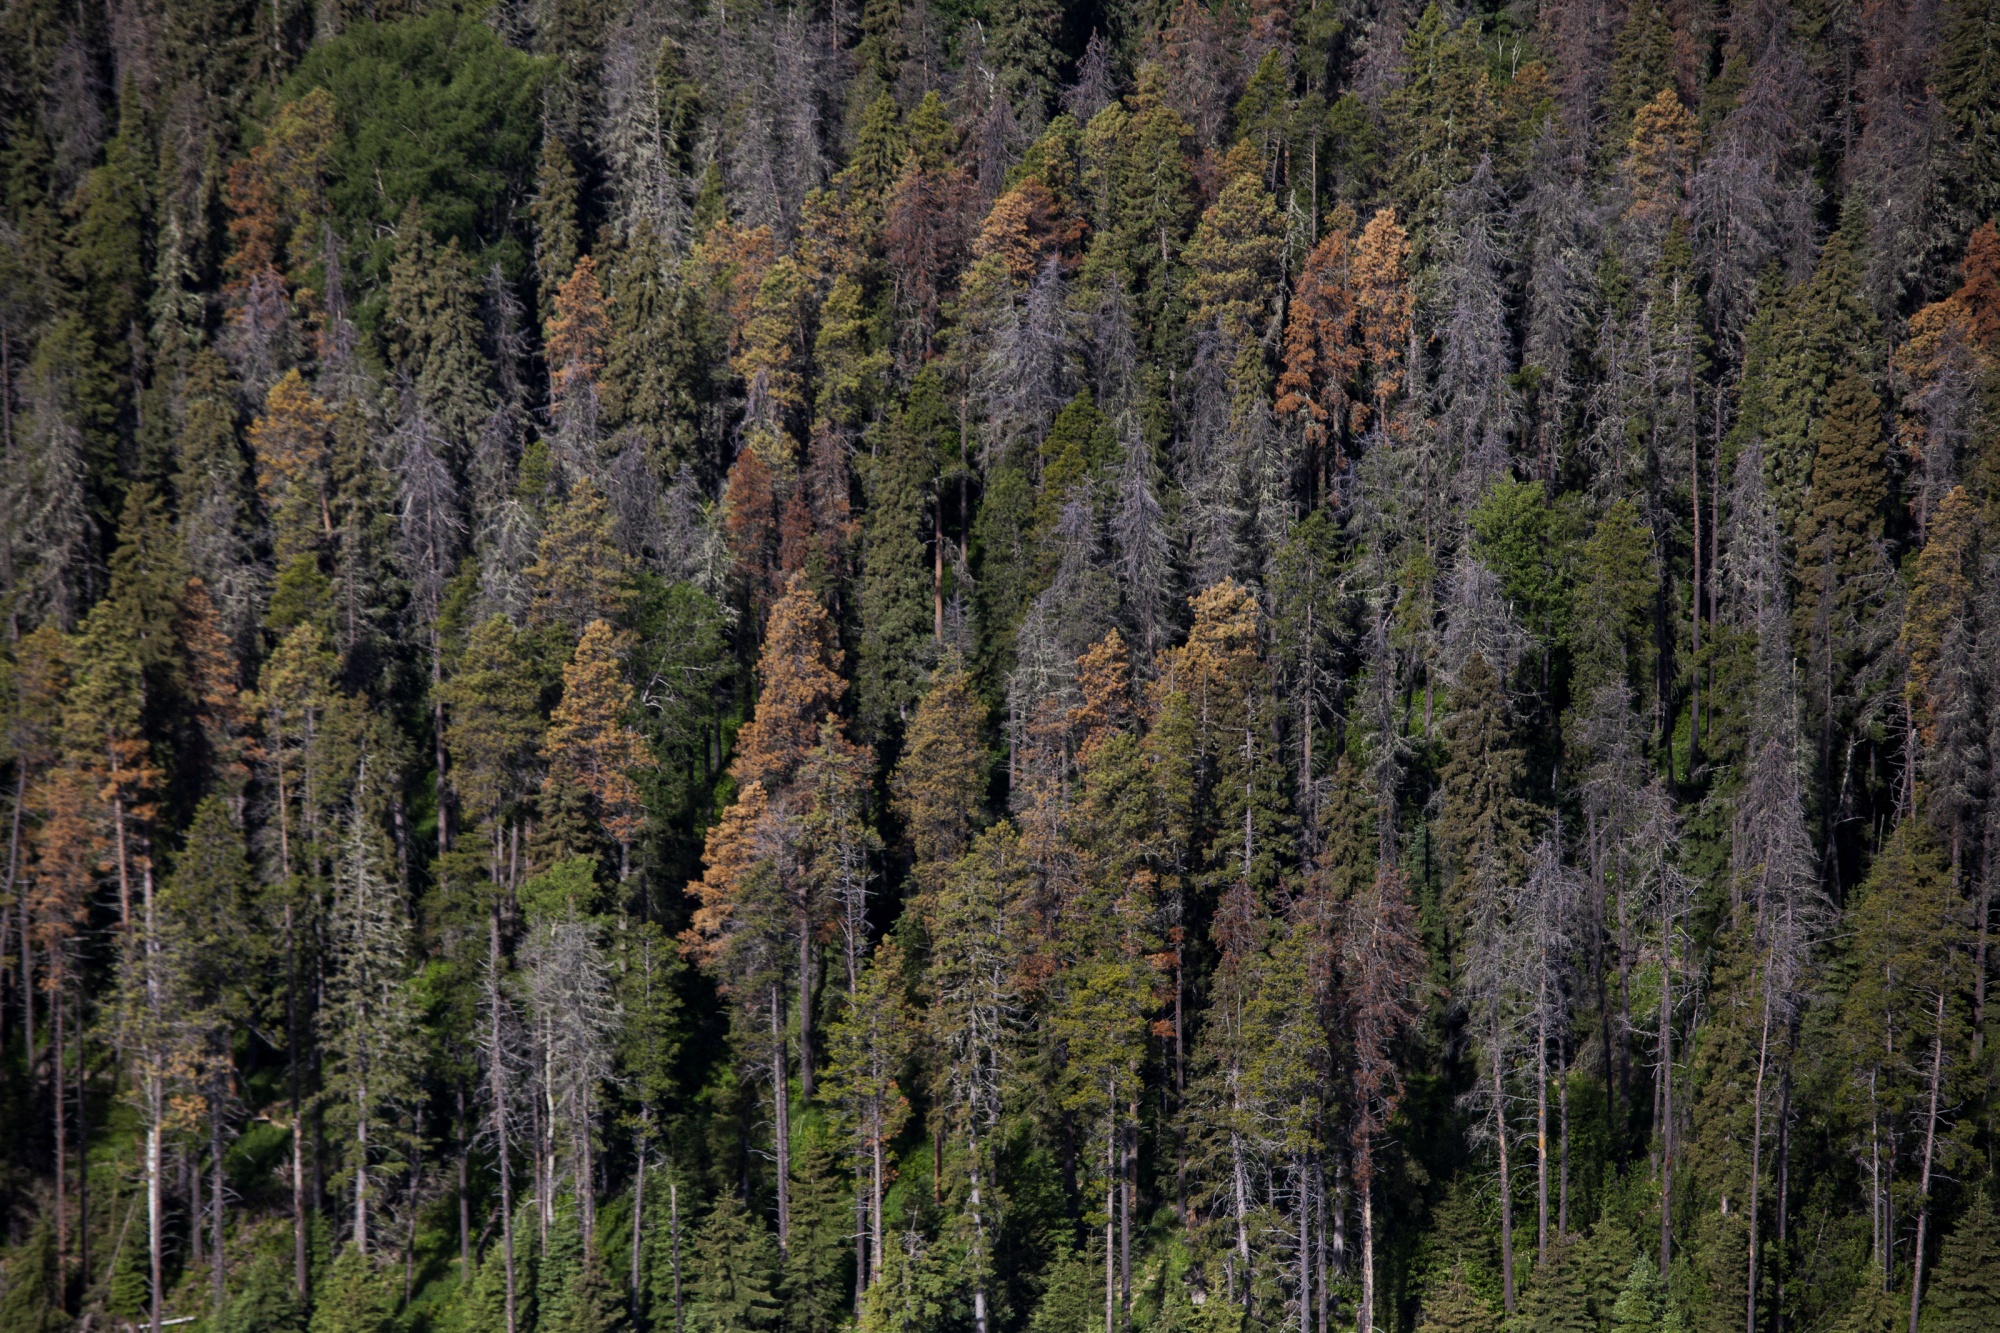 Mountain Pine Beetle Infestations Are Killing Forests, Could Worsen  Emissions - Bloomberg